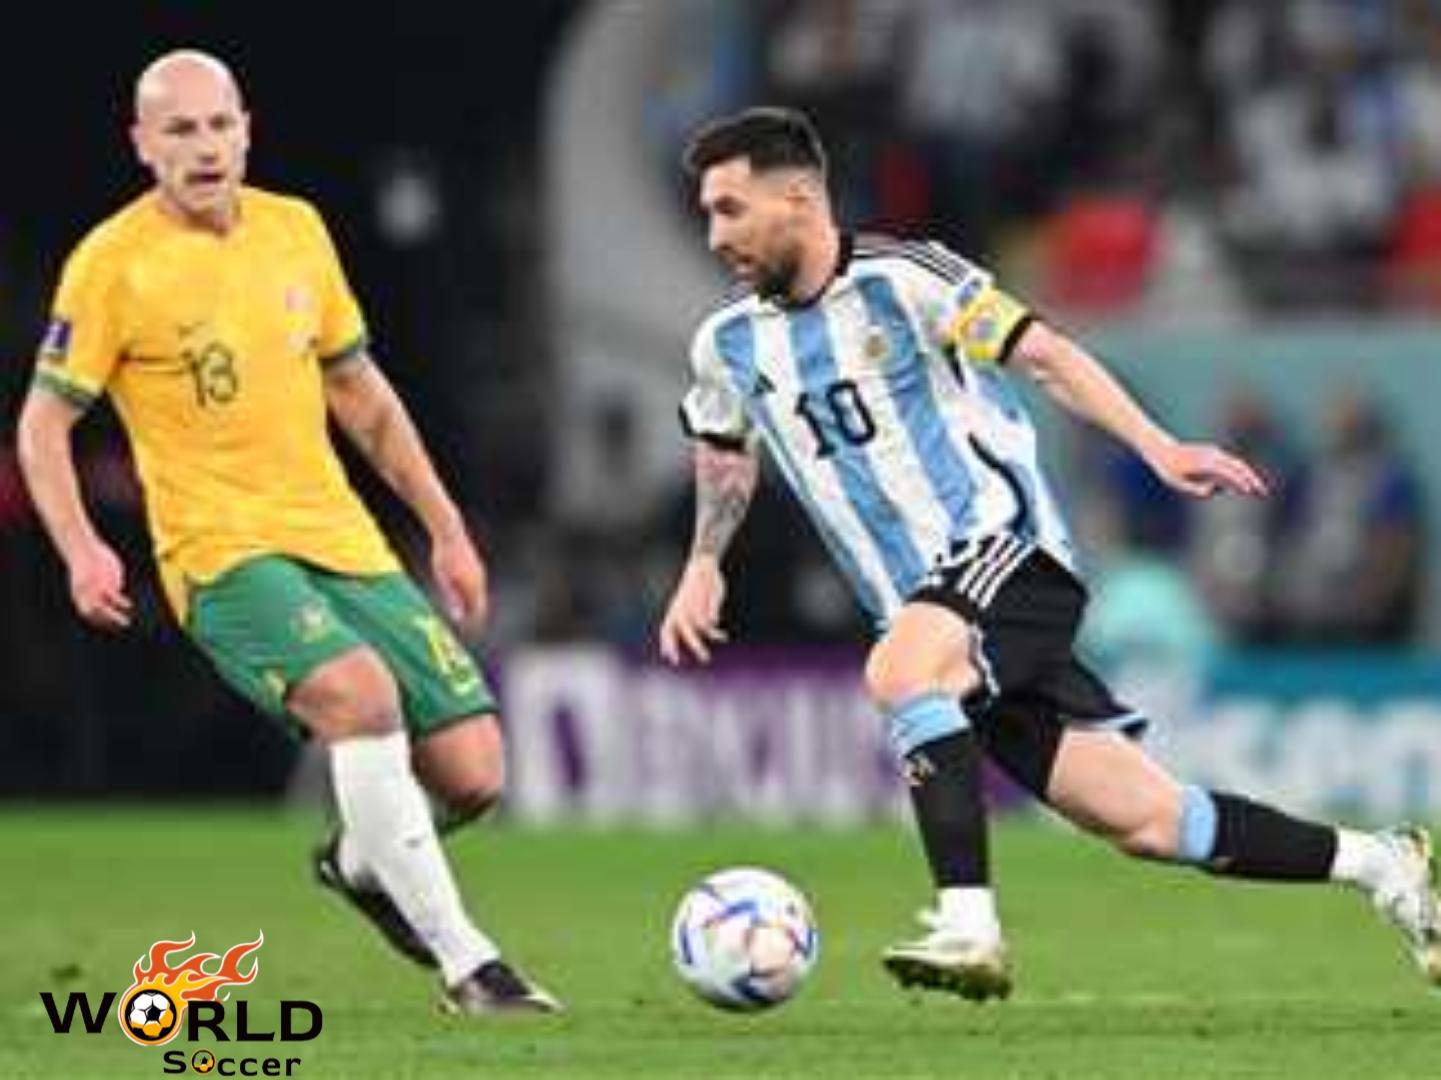 Argentina reached the quarter-finals of the World Cup with a difficult victory over Australia